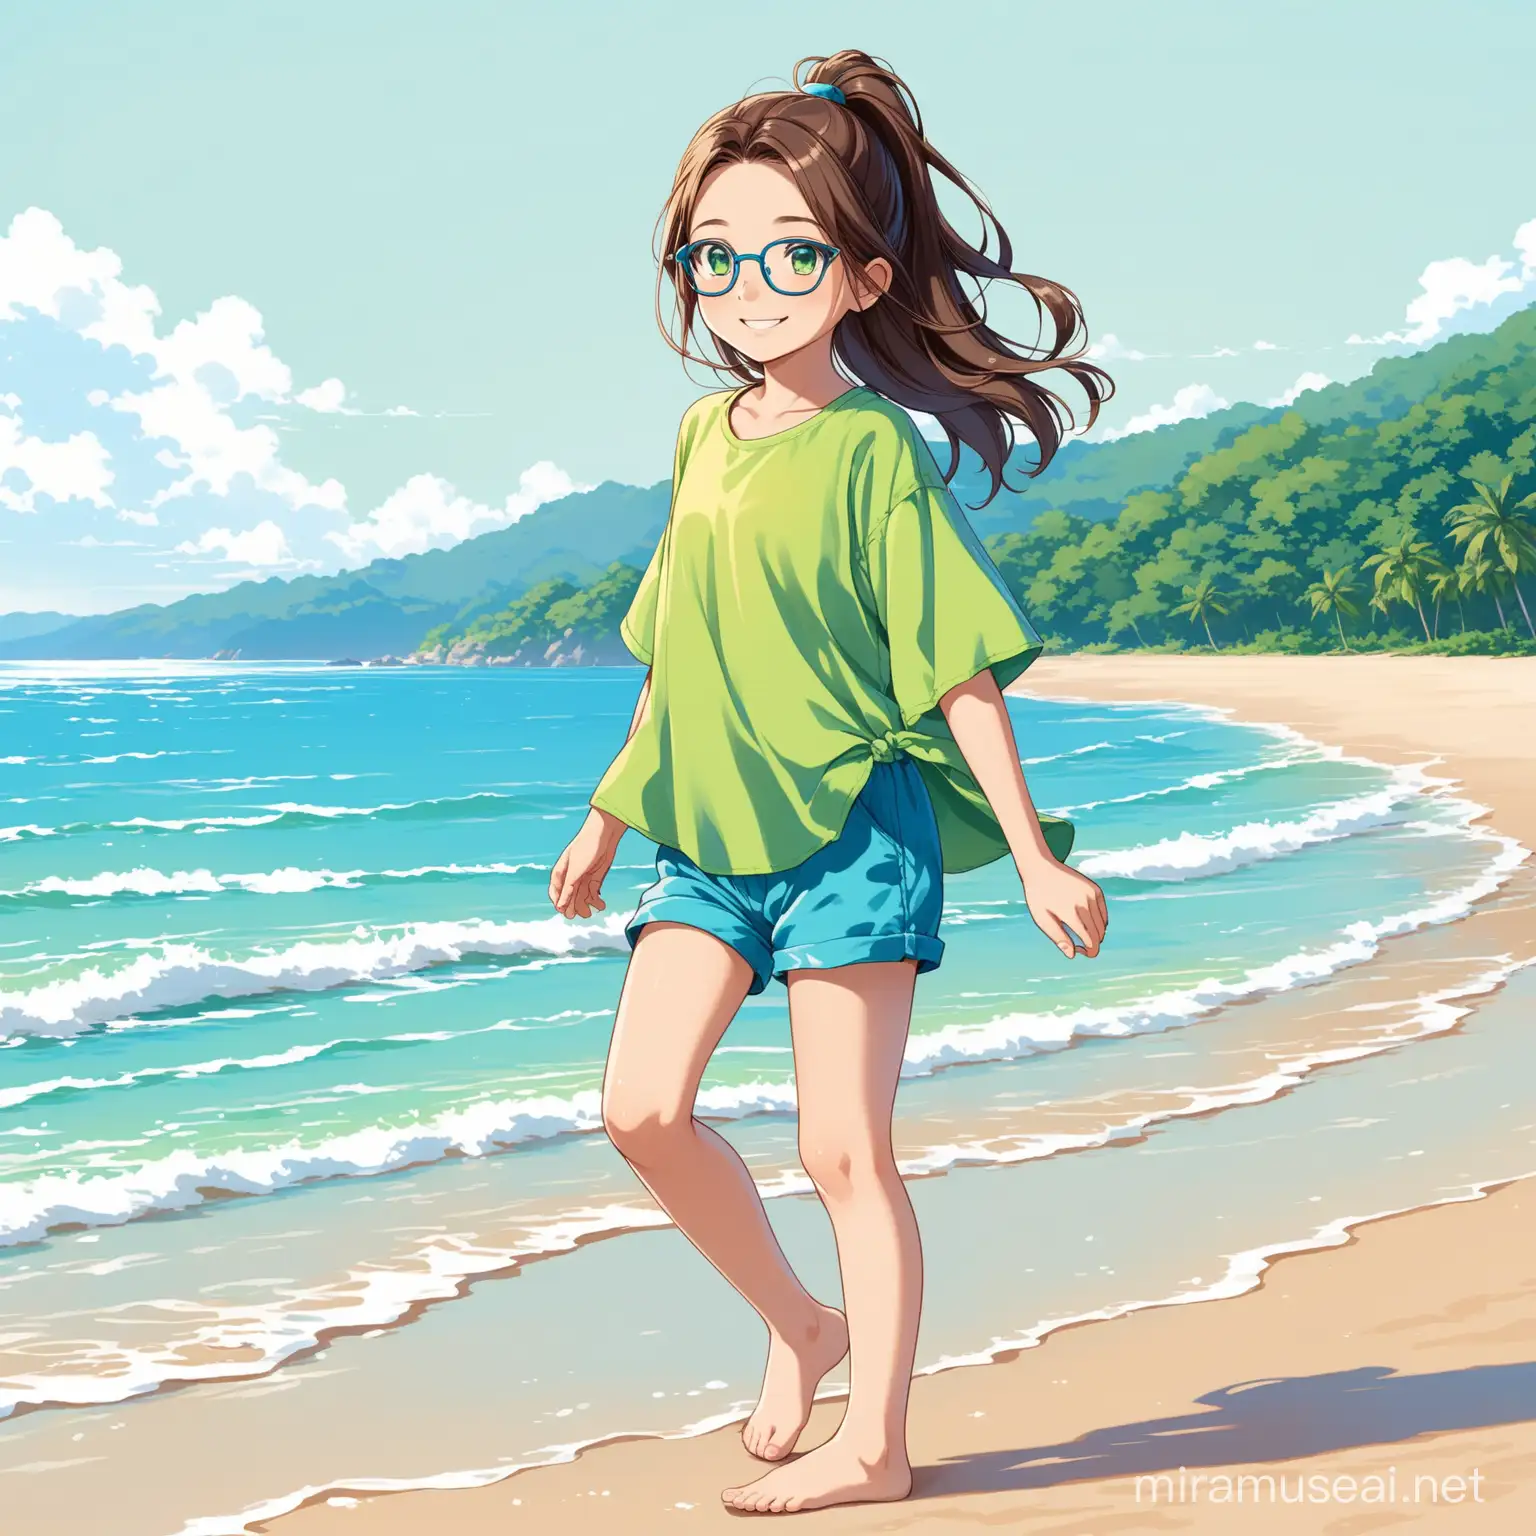 11 year old girl, long wavy brown hair in a high ponytail, green eyes, blue glasses, smiling, lemon colored loose shirt, baggy blue shorts, bare foot, walking along the shore line, smiling, 